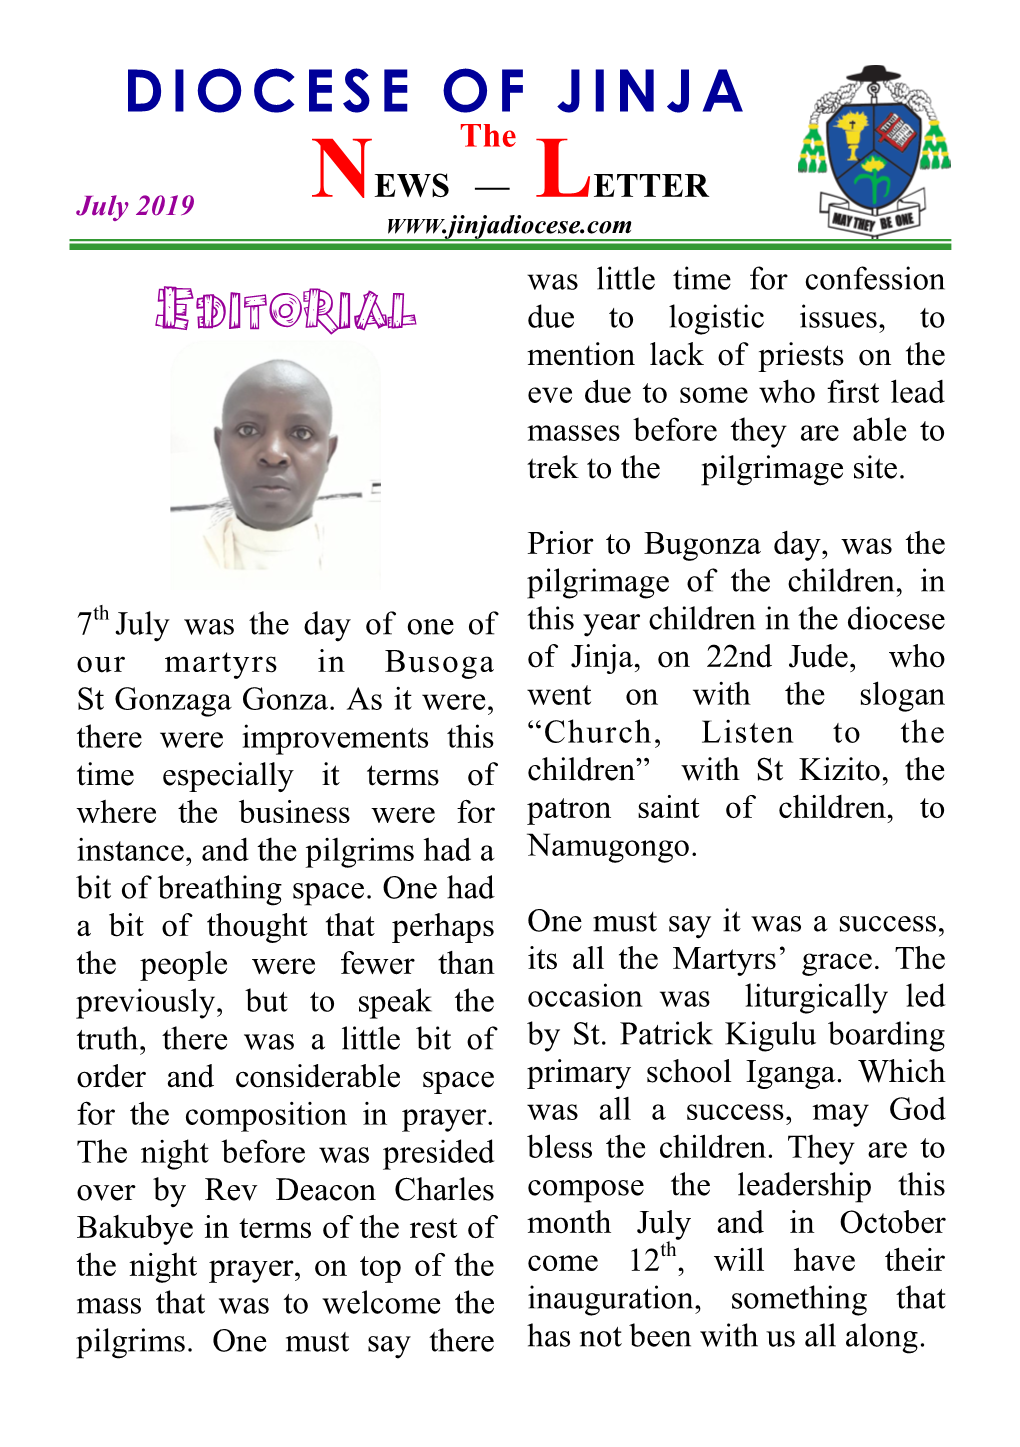 Editorial Due to Logistic Issues, to Mention Lack of Priests on the Eve Due to Some Who First Lead Masses Before They Are Able to Trek to the Pilgrimage Site